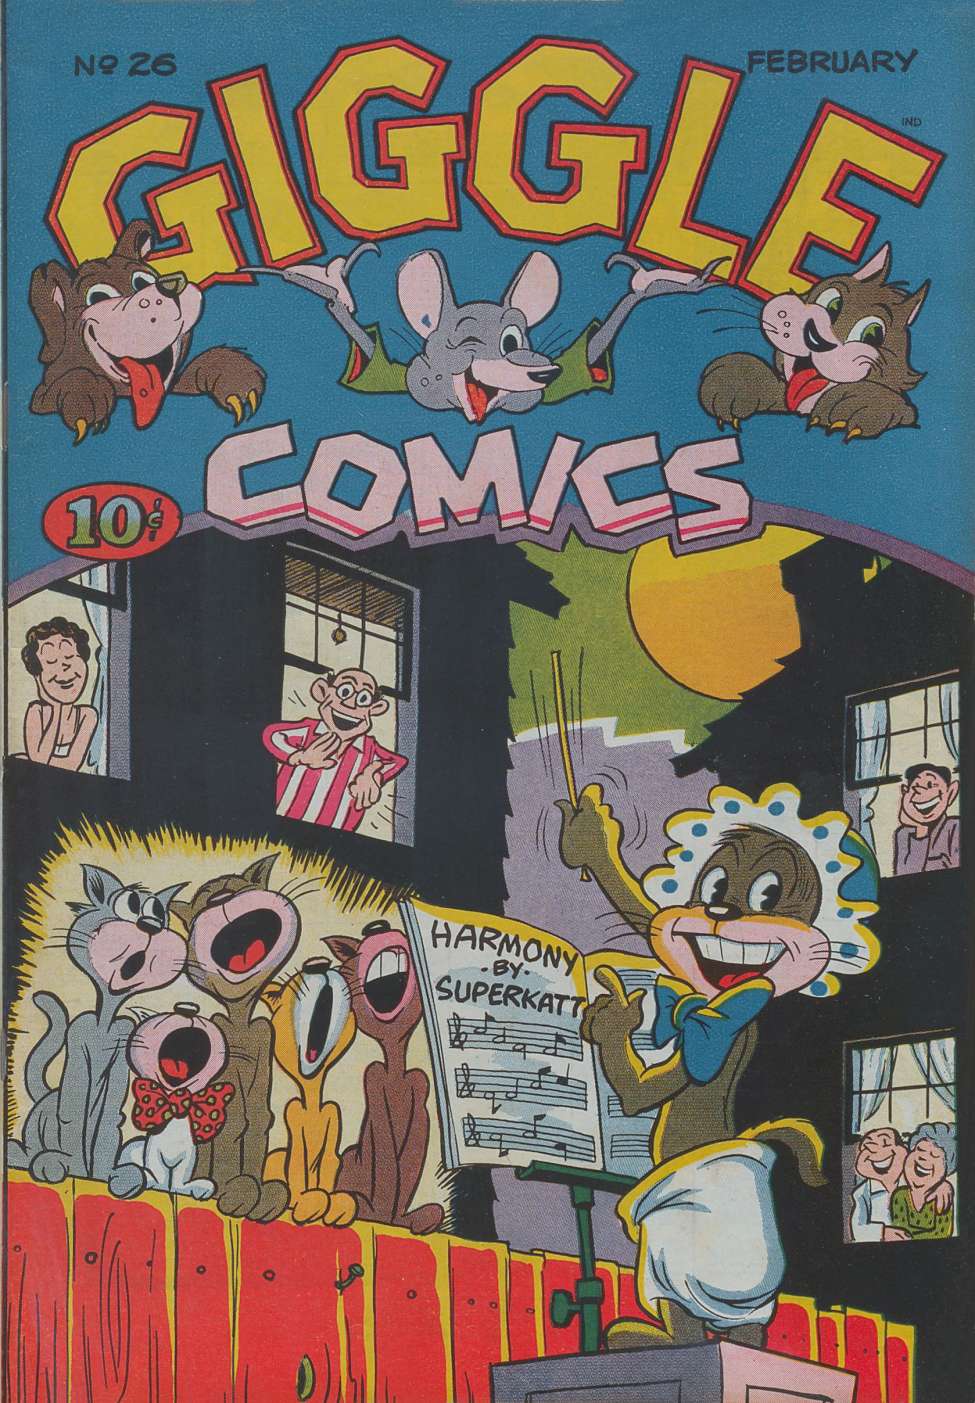 Book Cover For Giggle Comics 26